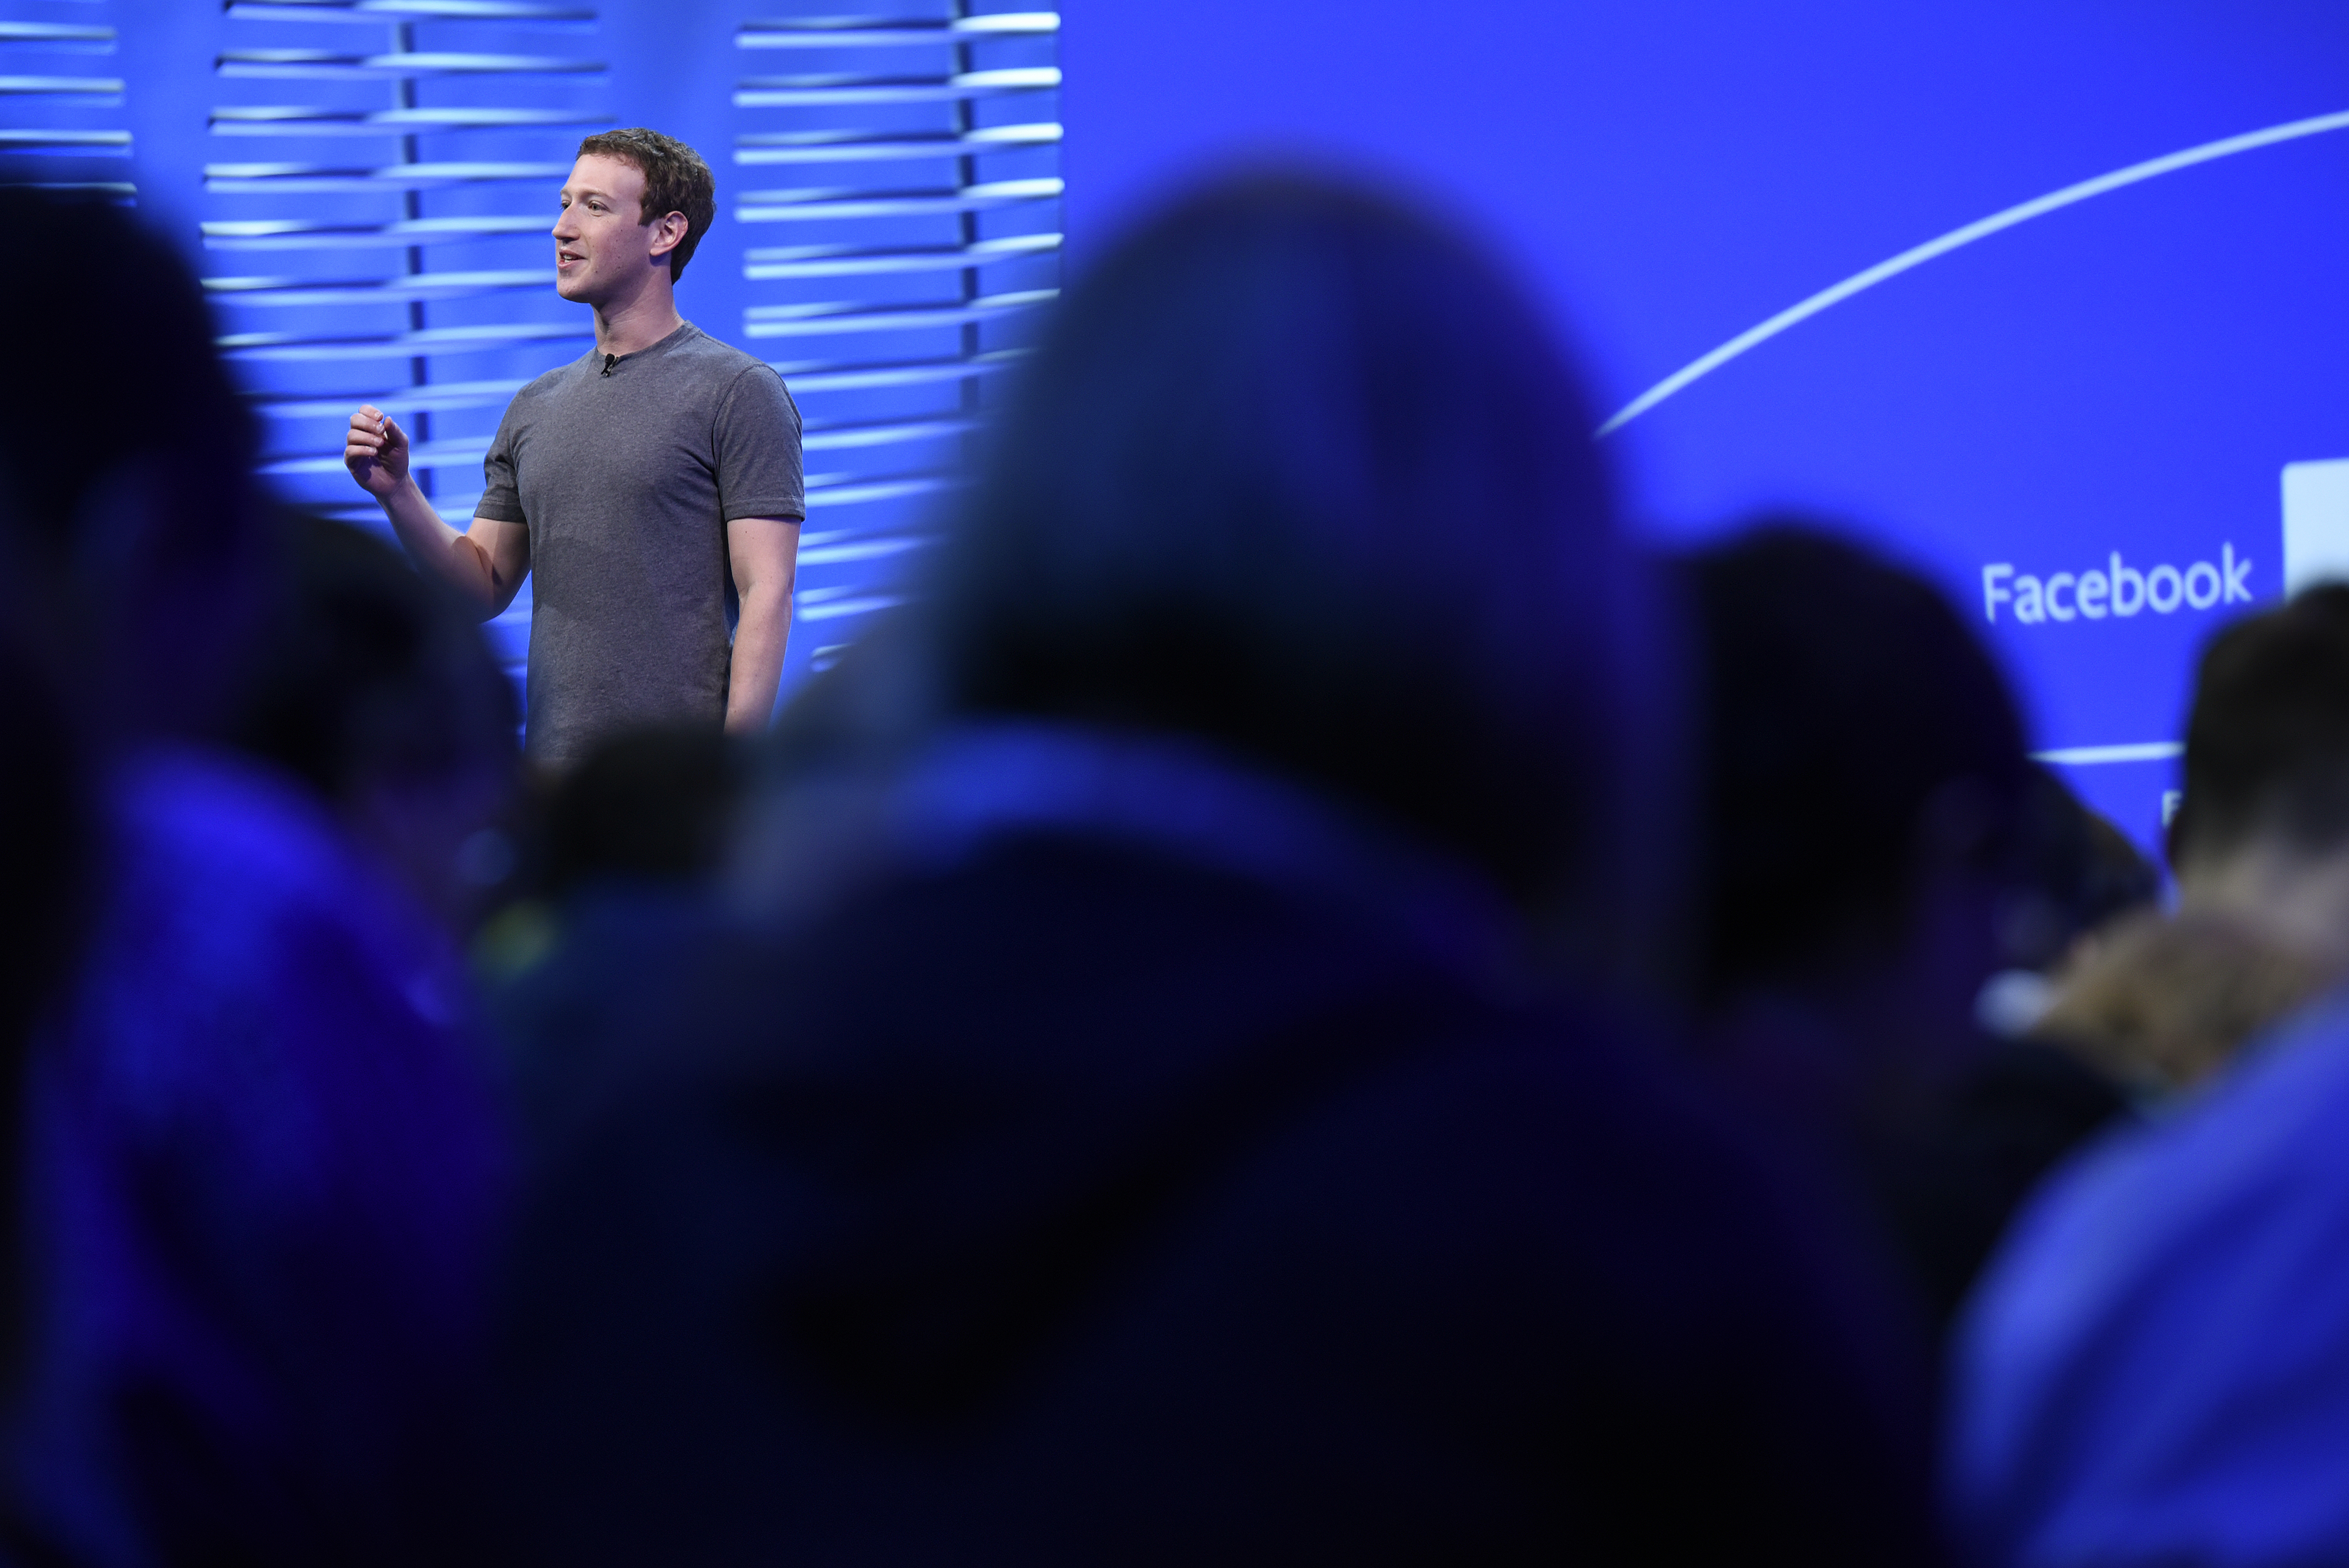 Mark Zuckerberg, founder and CEO of Facebook, speaks during the Facebook F8 Developers Conference in San Francisco on April 12, 2016 (Bloomberg/Getty Images)